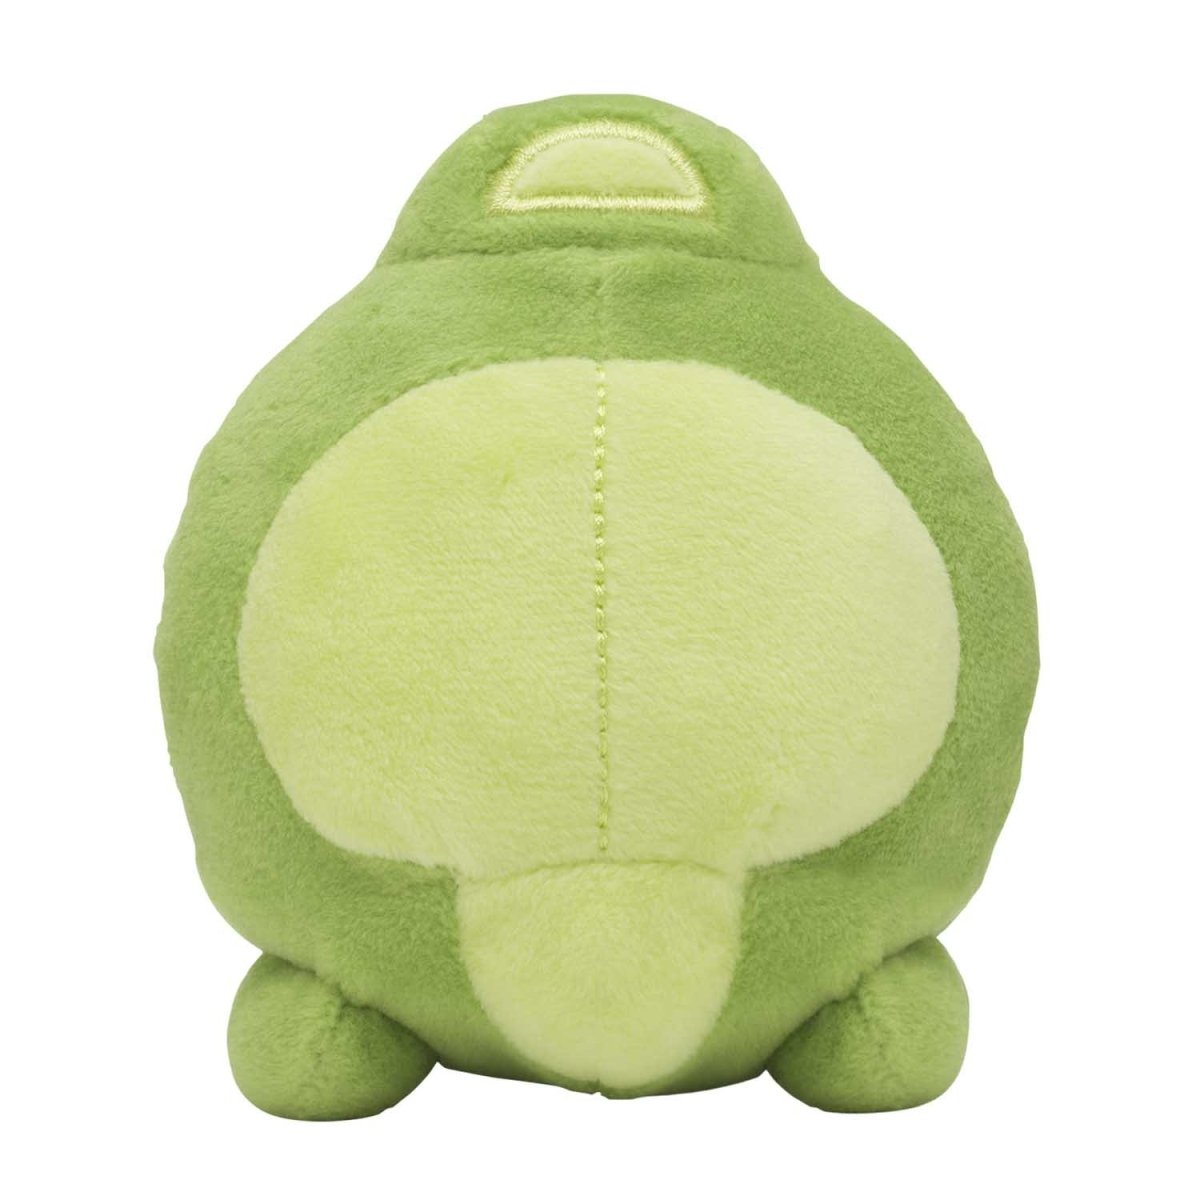 Duosion Sitting Cuties Plush - 4 ¼ In. | Pokémon Center Official Site